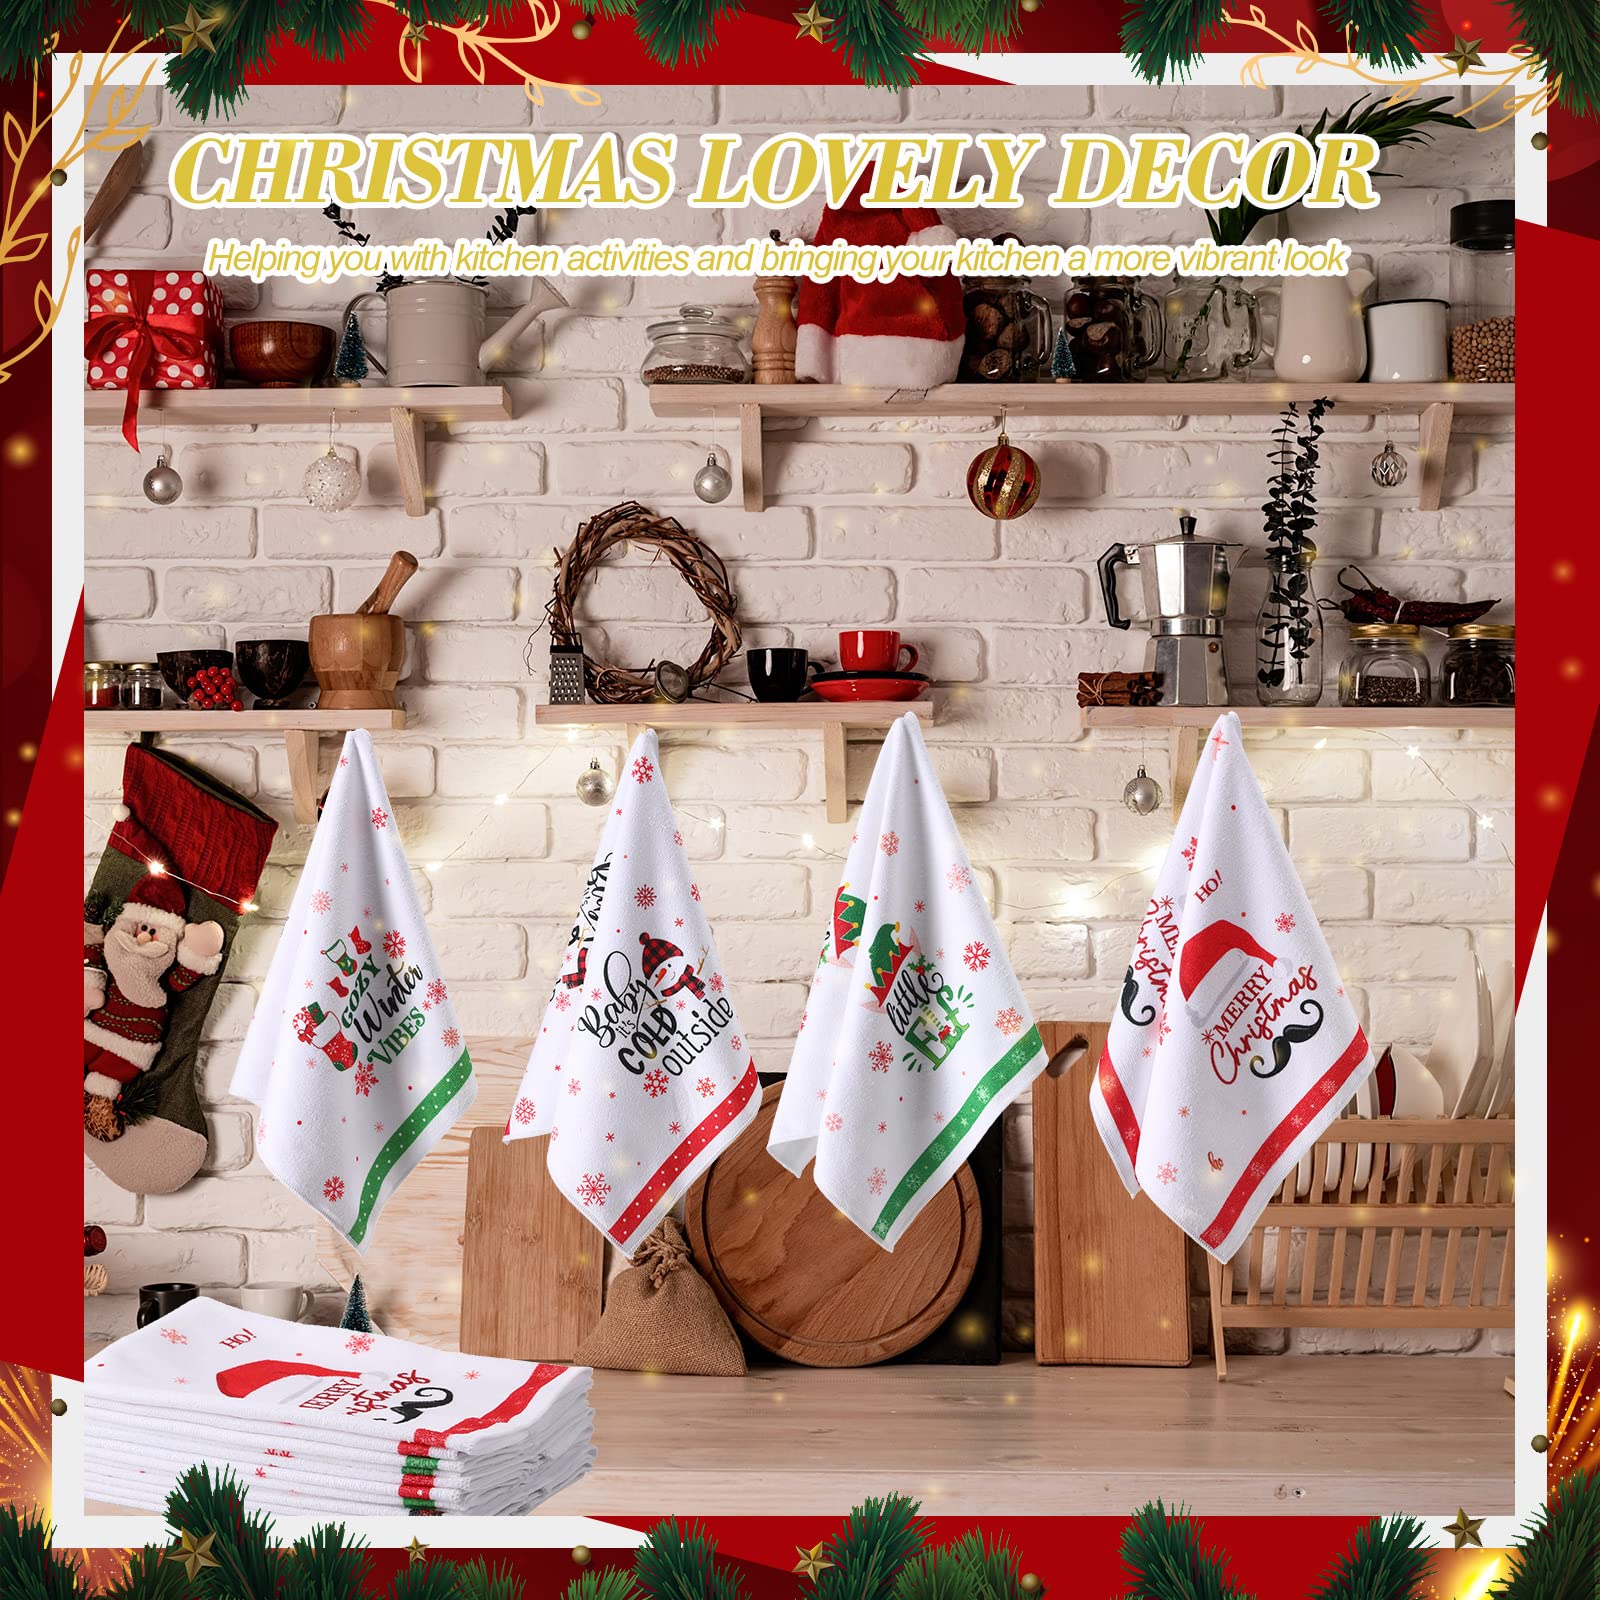 6 Pieces Christmas Hand Towels, Christmas Towels for Kitchen Towels Farmhouse Christmas Dishtowels Holiday Tea Towels for Bathroom Xmas Home Gift 16 x 24 Inch (Lovely)